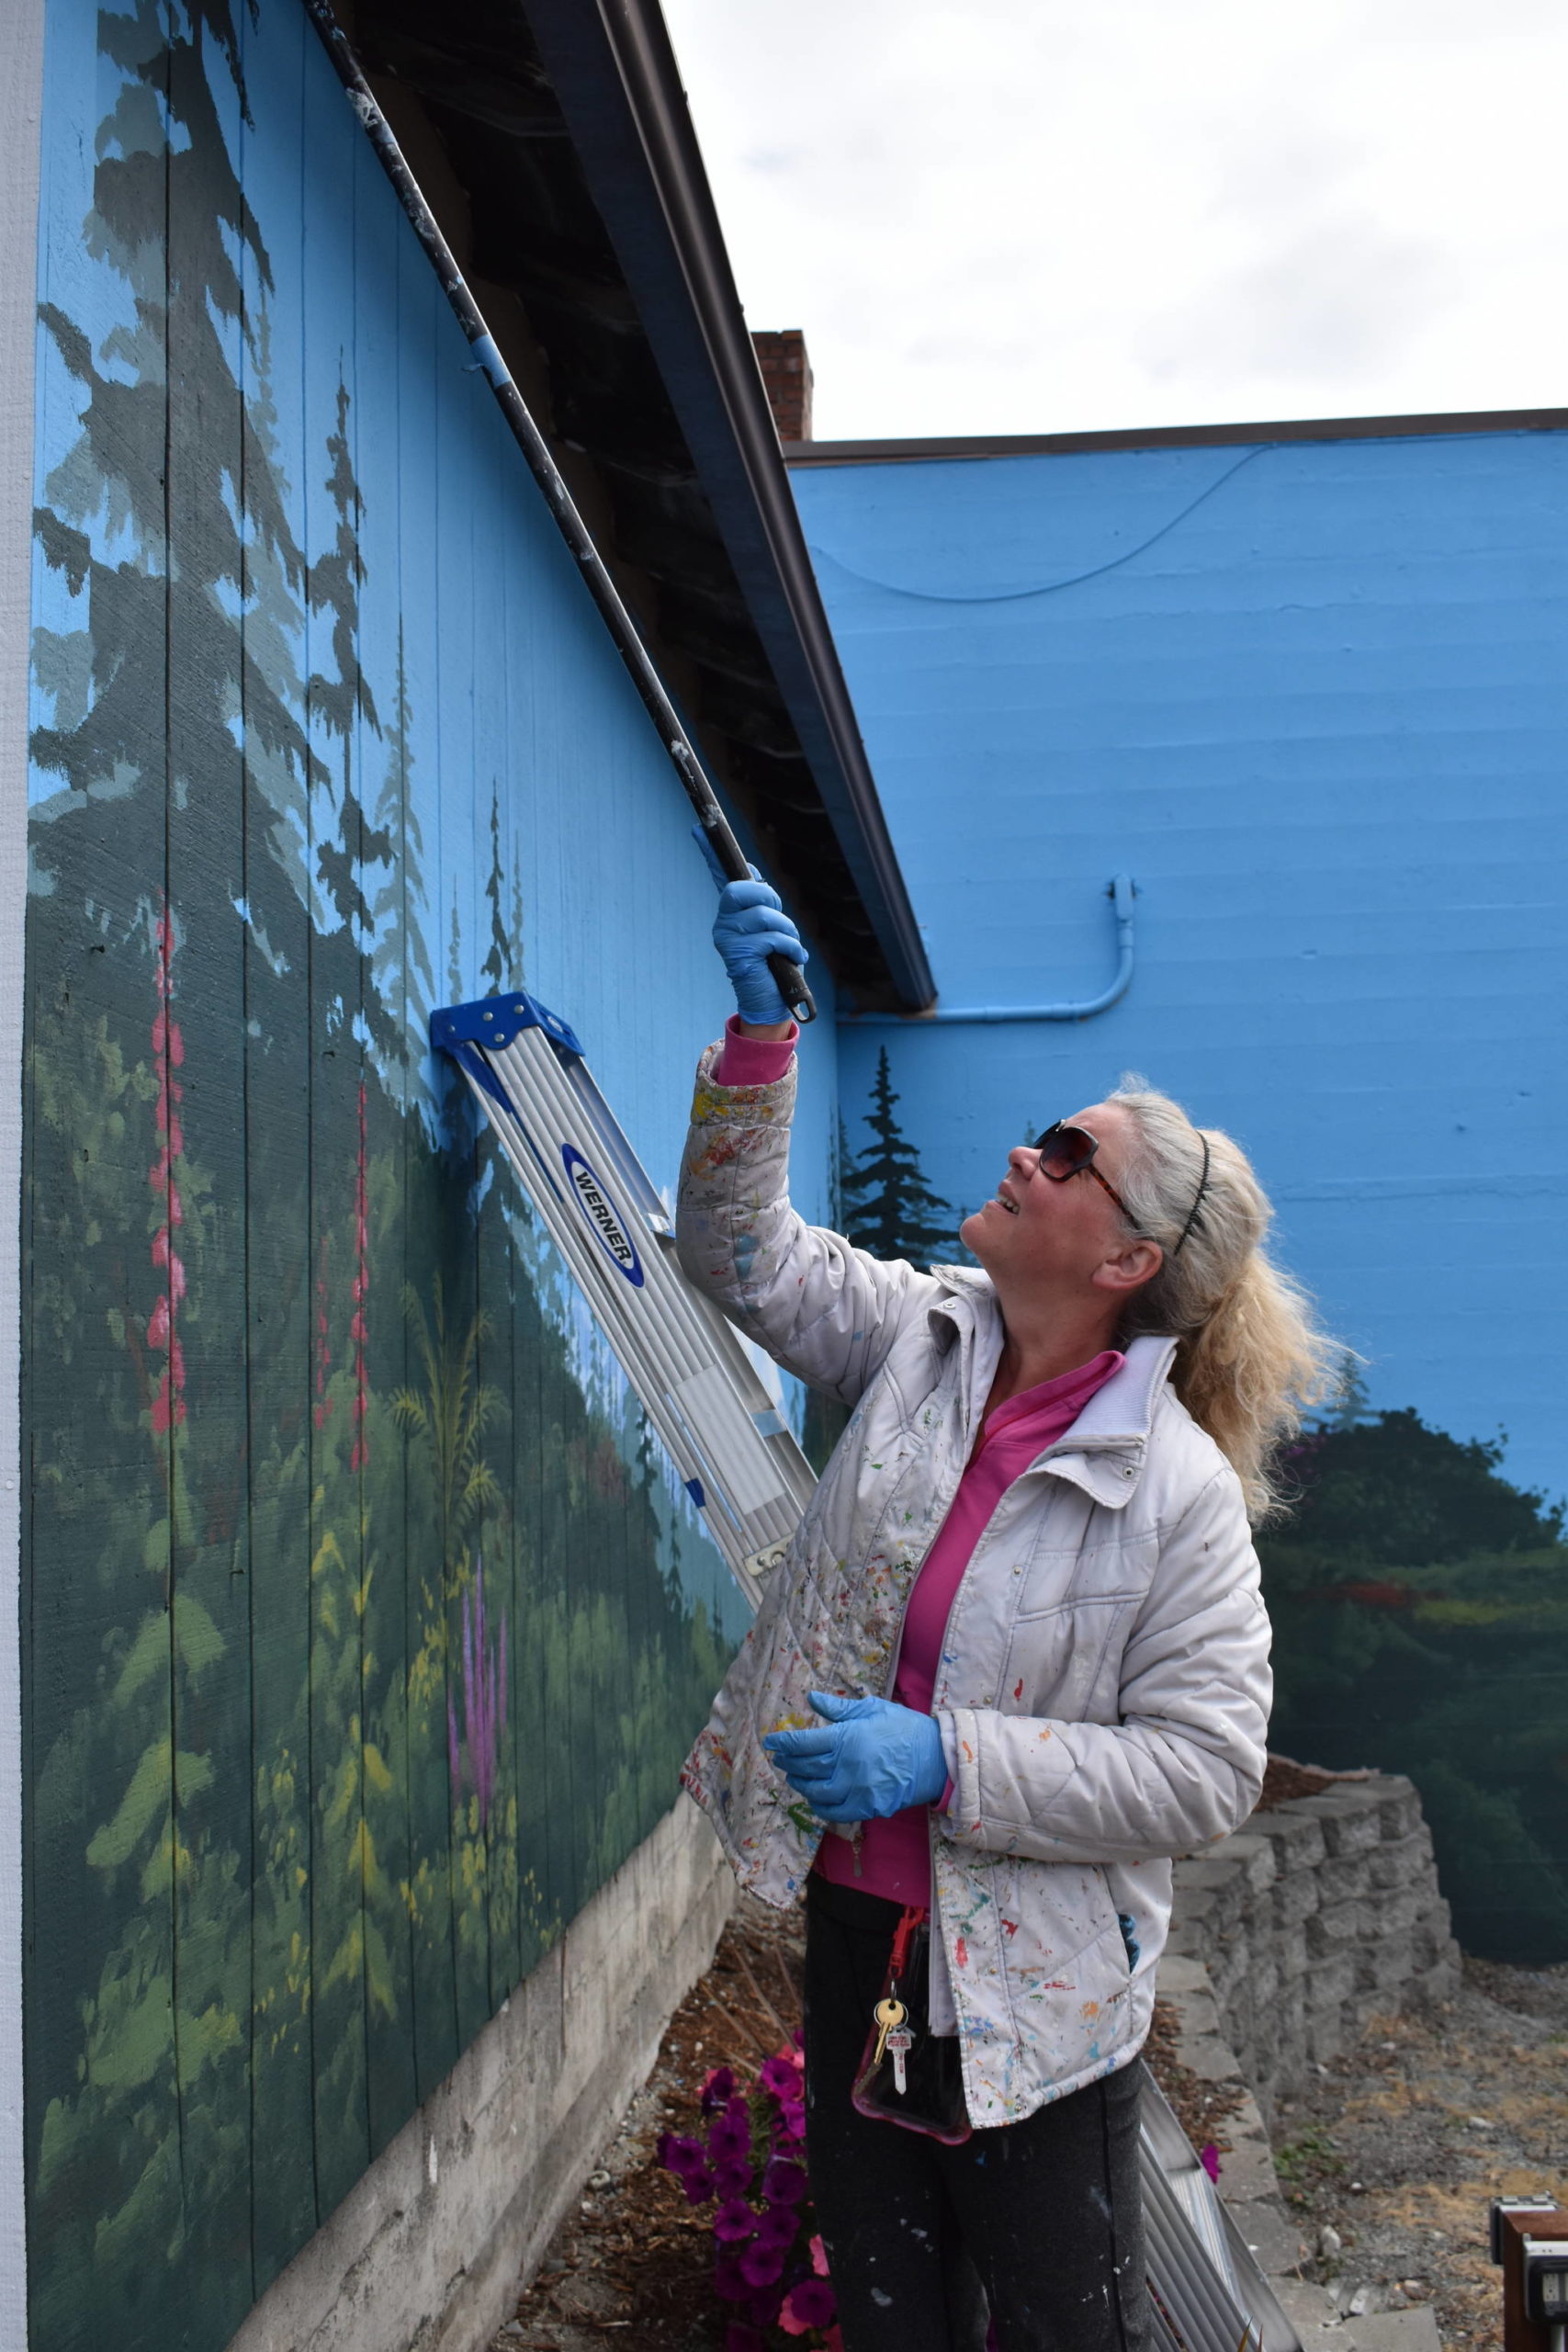 Photo by Emily Gilbert/Whidbey News-Times Paula Fries working on a mural on the corner of Southeast Dock Street and Southeast Pioneer Way in downtown Oak Harbor. The mural spans two walls and features Mount Baker, rolling hills and a soon-to-be gate to a secret garden.
Photo by Emily Gilbert/Whidbey News-Times Paula Fries working on a mural on the corner of Southeast Dock Street and Southeast Pioneer Way in downtown Oak Harbor. The mural spans two walls and features Mount Baker, rolling hills and a soon-to-be gate to a secret garden.